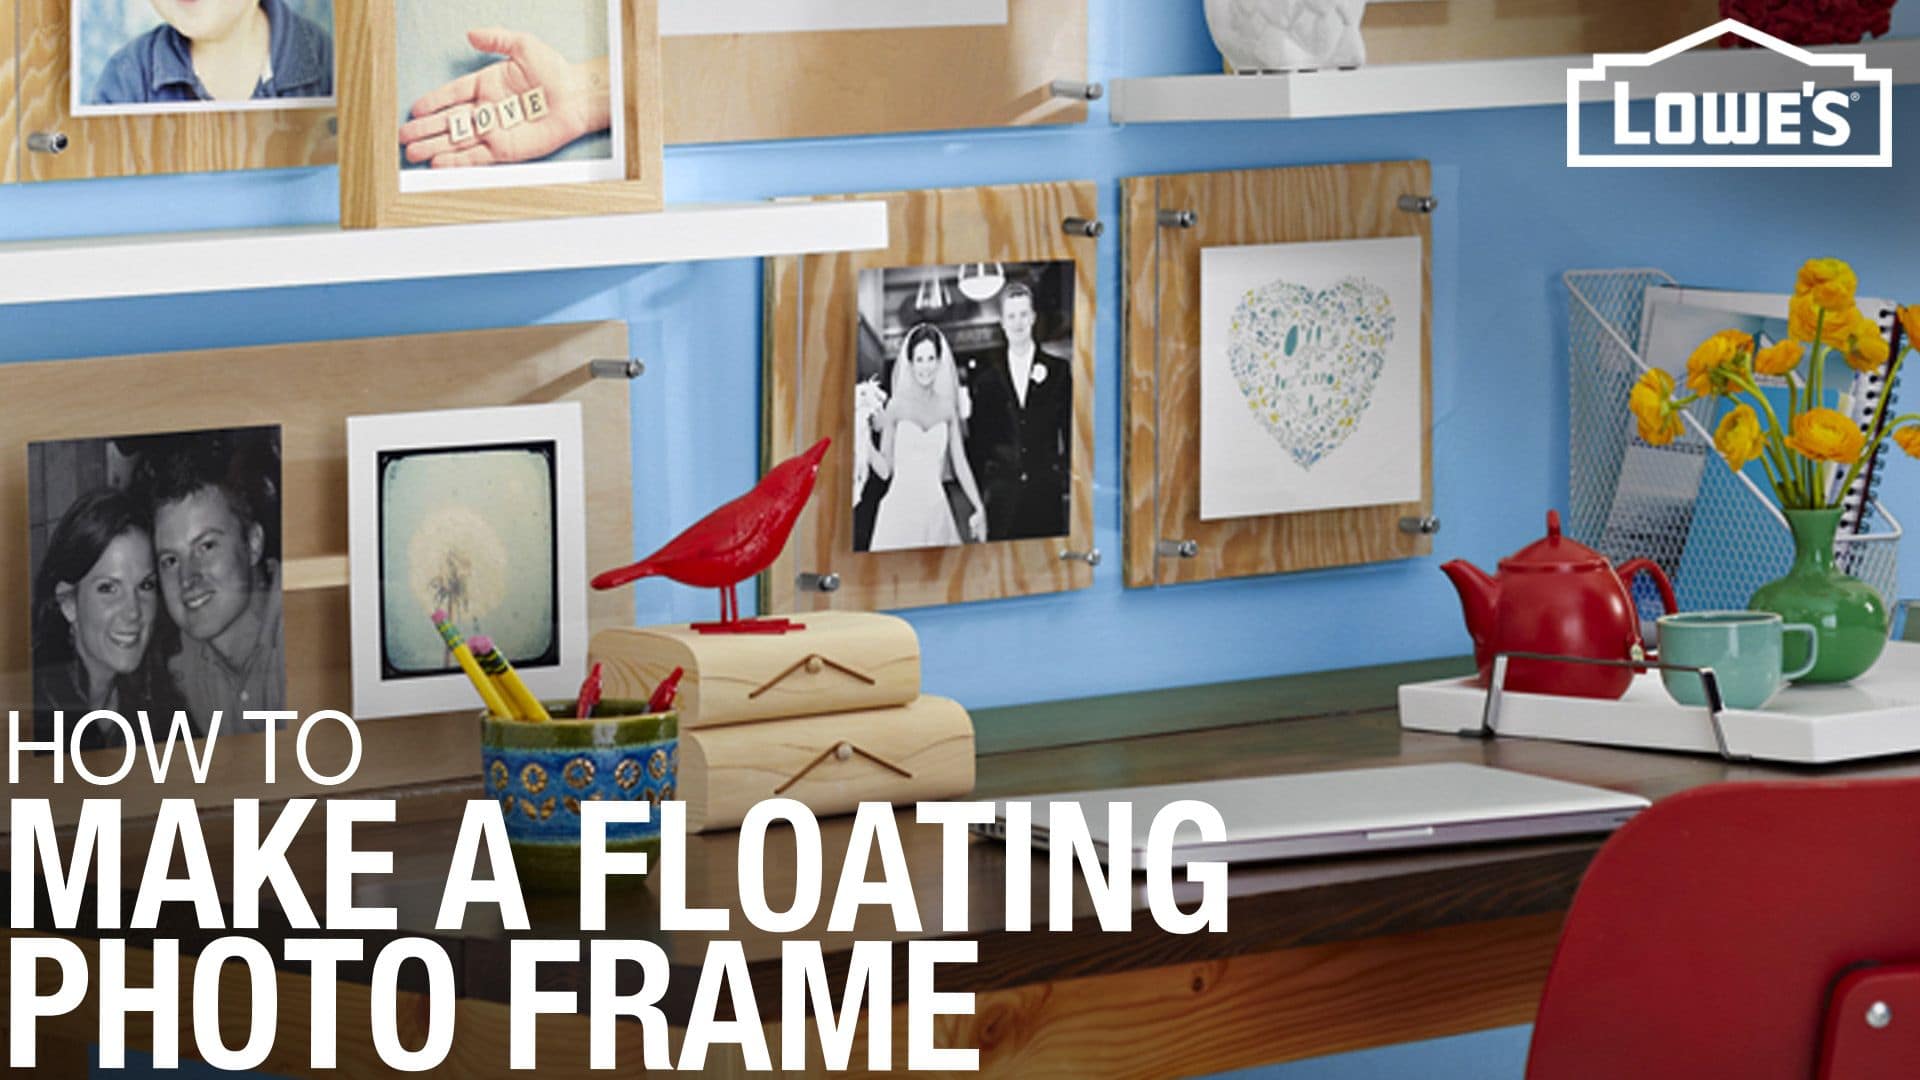 Clear Floating Acrylic Frames, 2-pack